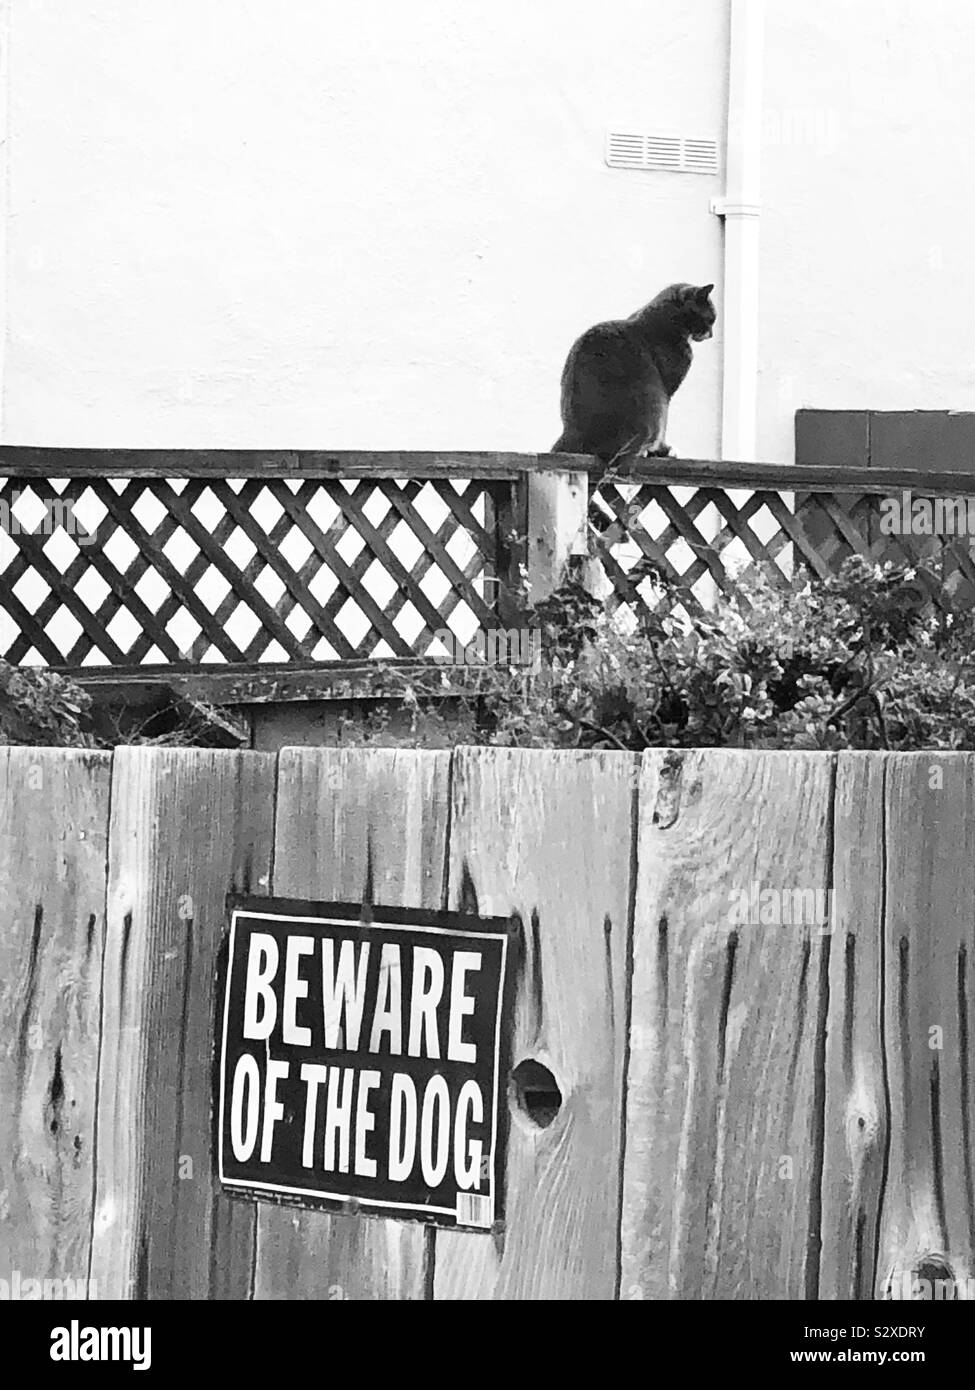 Black cat sitting on a garden fence with a sign “Beware of the Dog” below it. Stock Photo